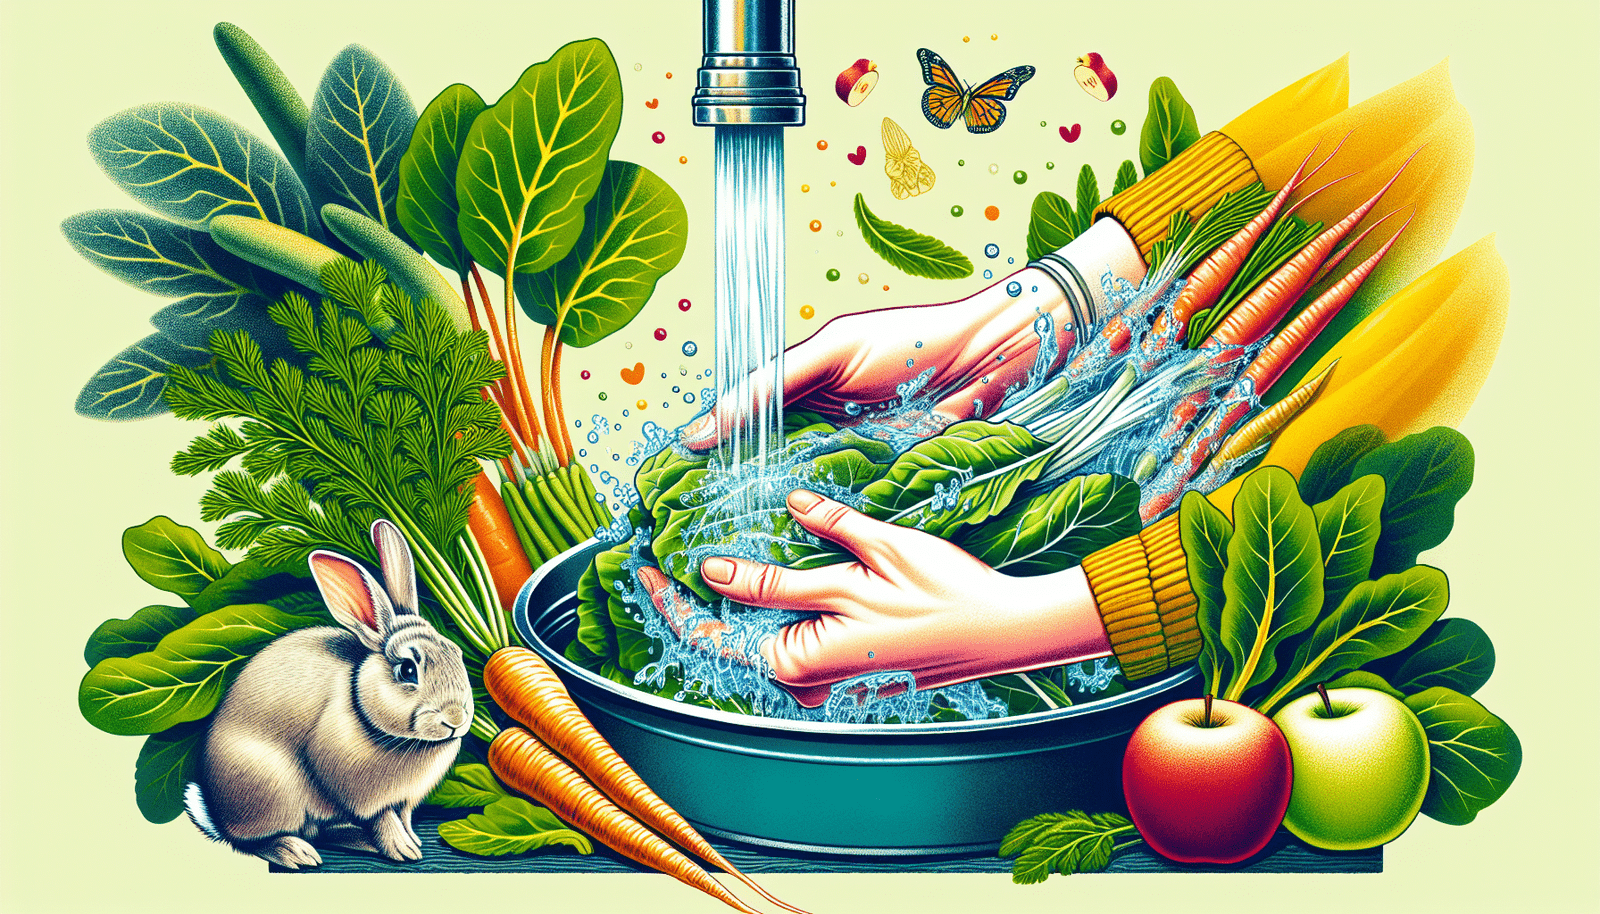 Colorful illustration of washing fruits and vegetables